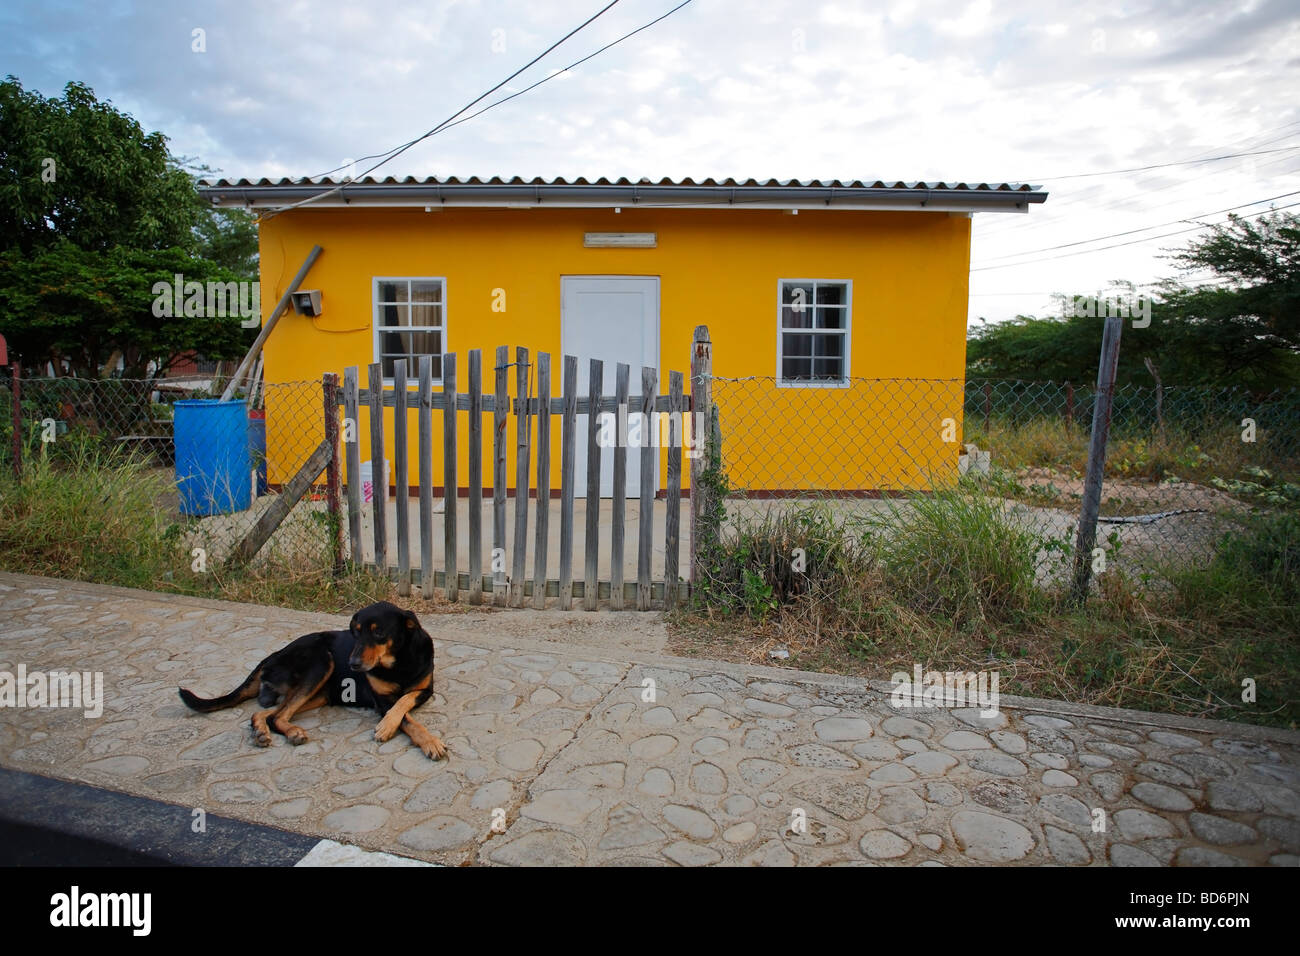 A lazy dog resting on the sidewalk in front of a small yellow house in Rincon Bonaire Netherlands Antilles Stock Photo